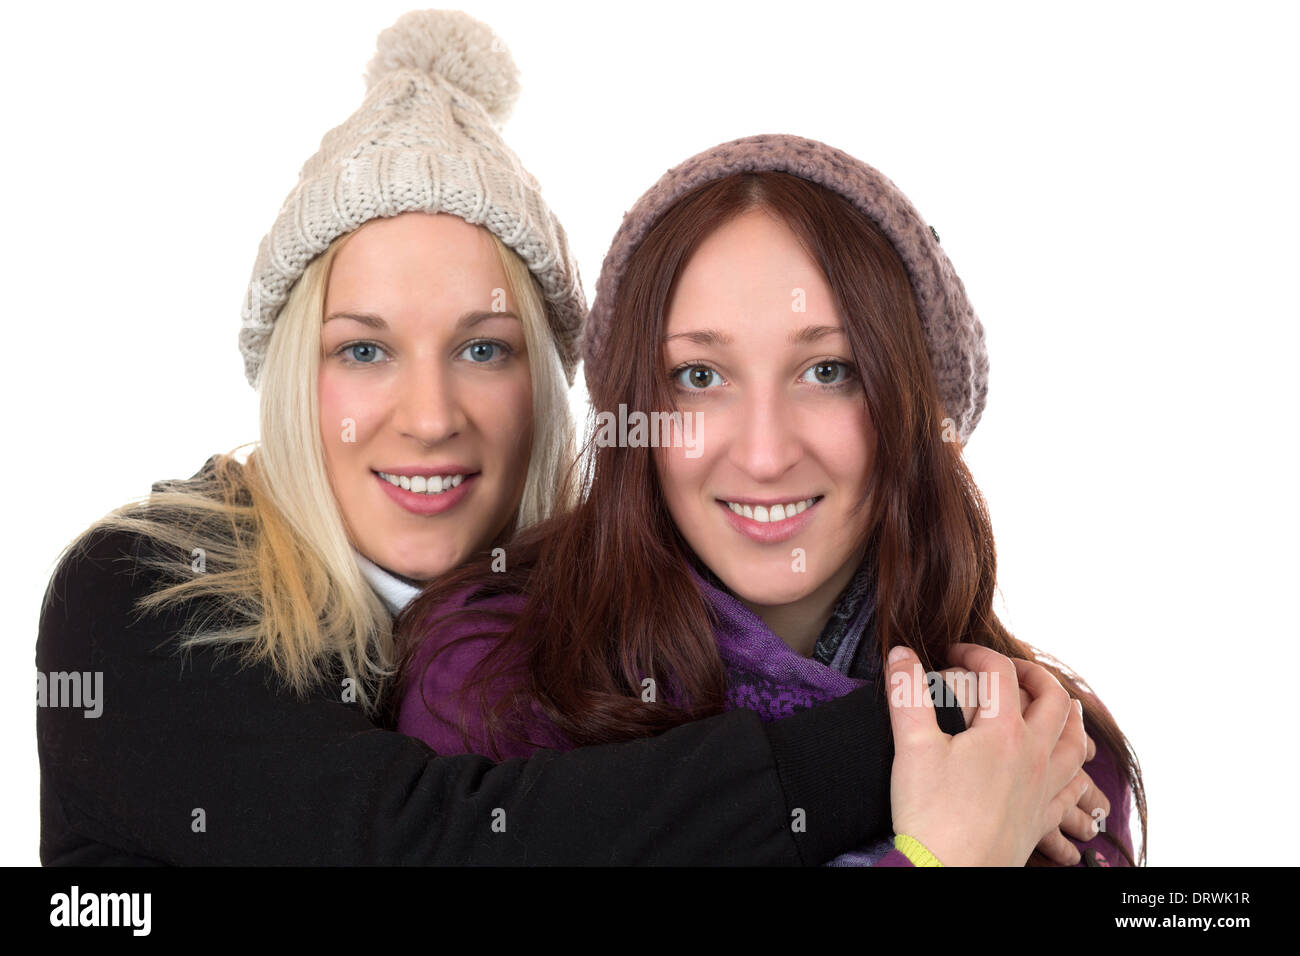 Two young women in winter clothing hug each other, isolated on a white background Stock Photo